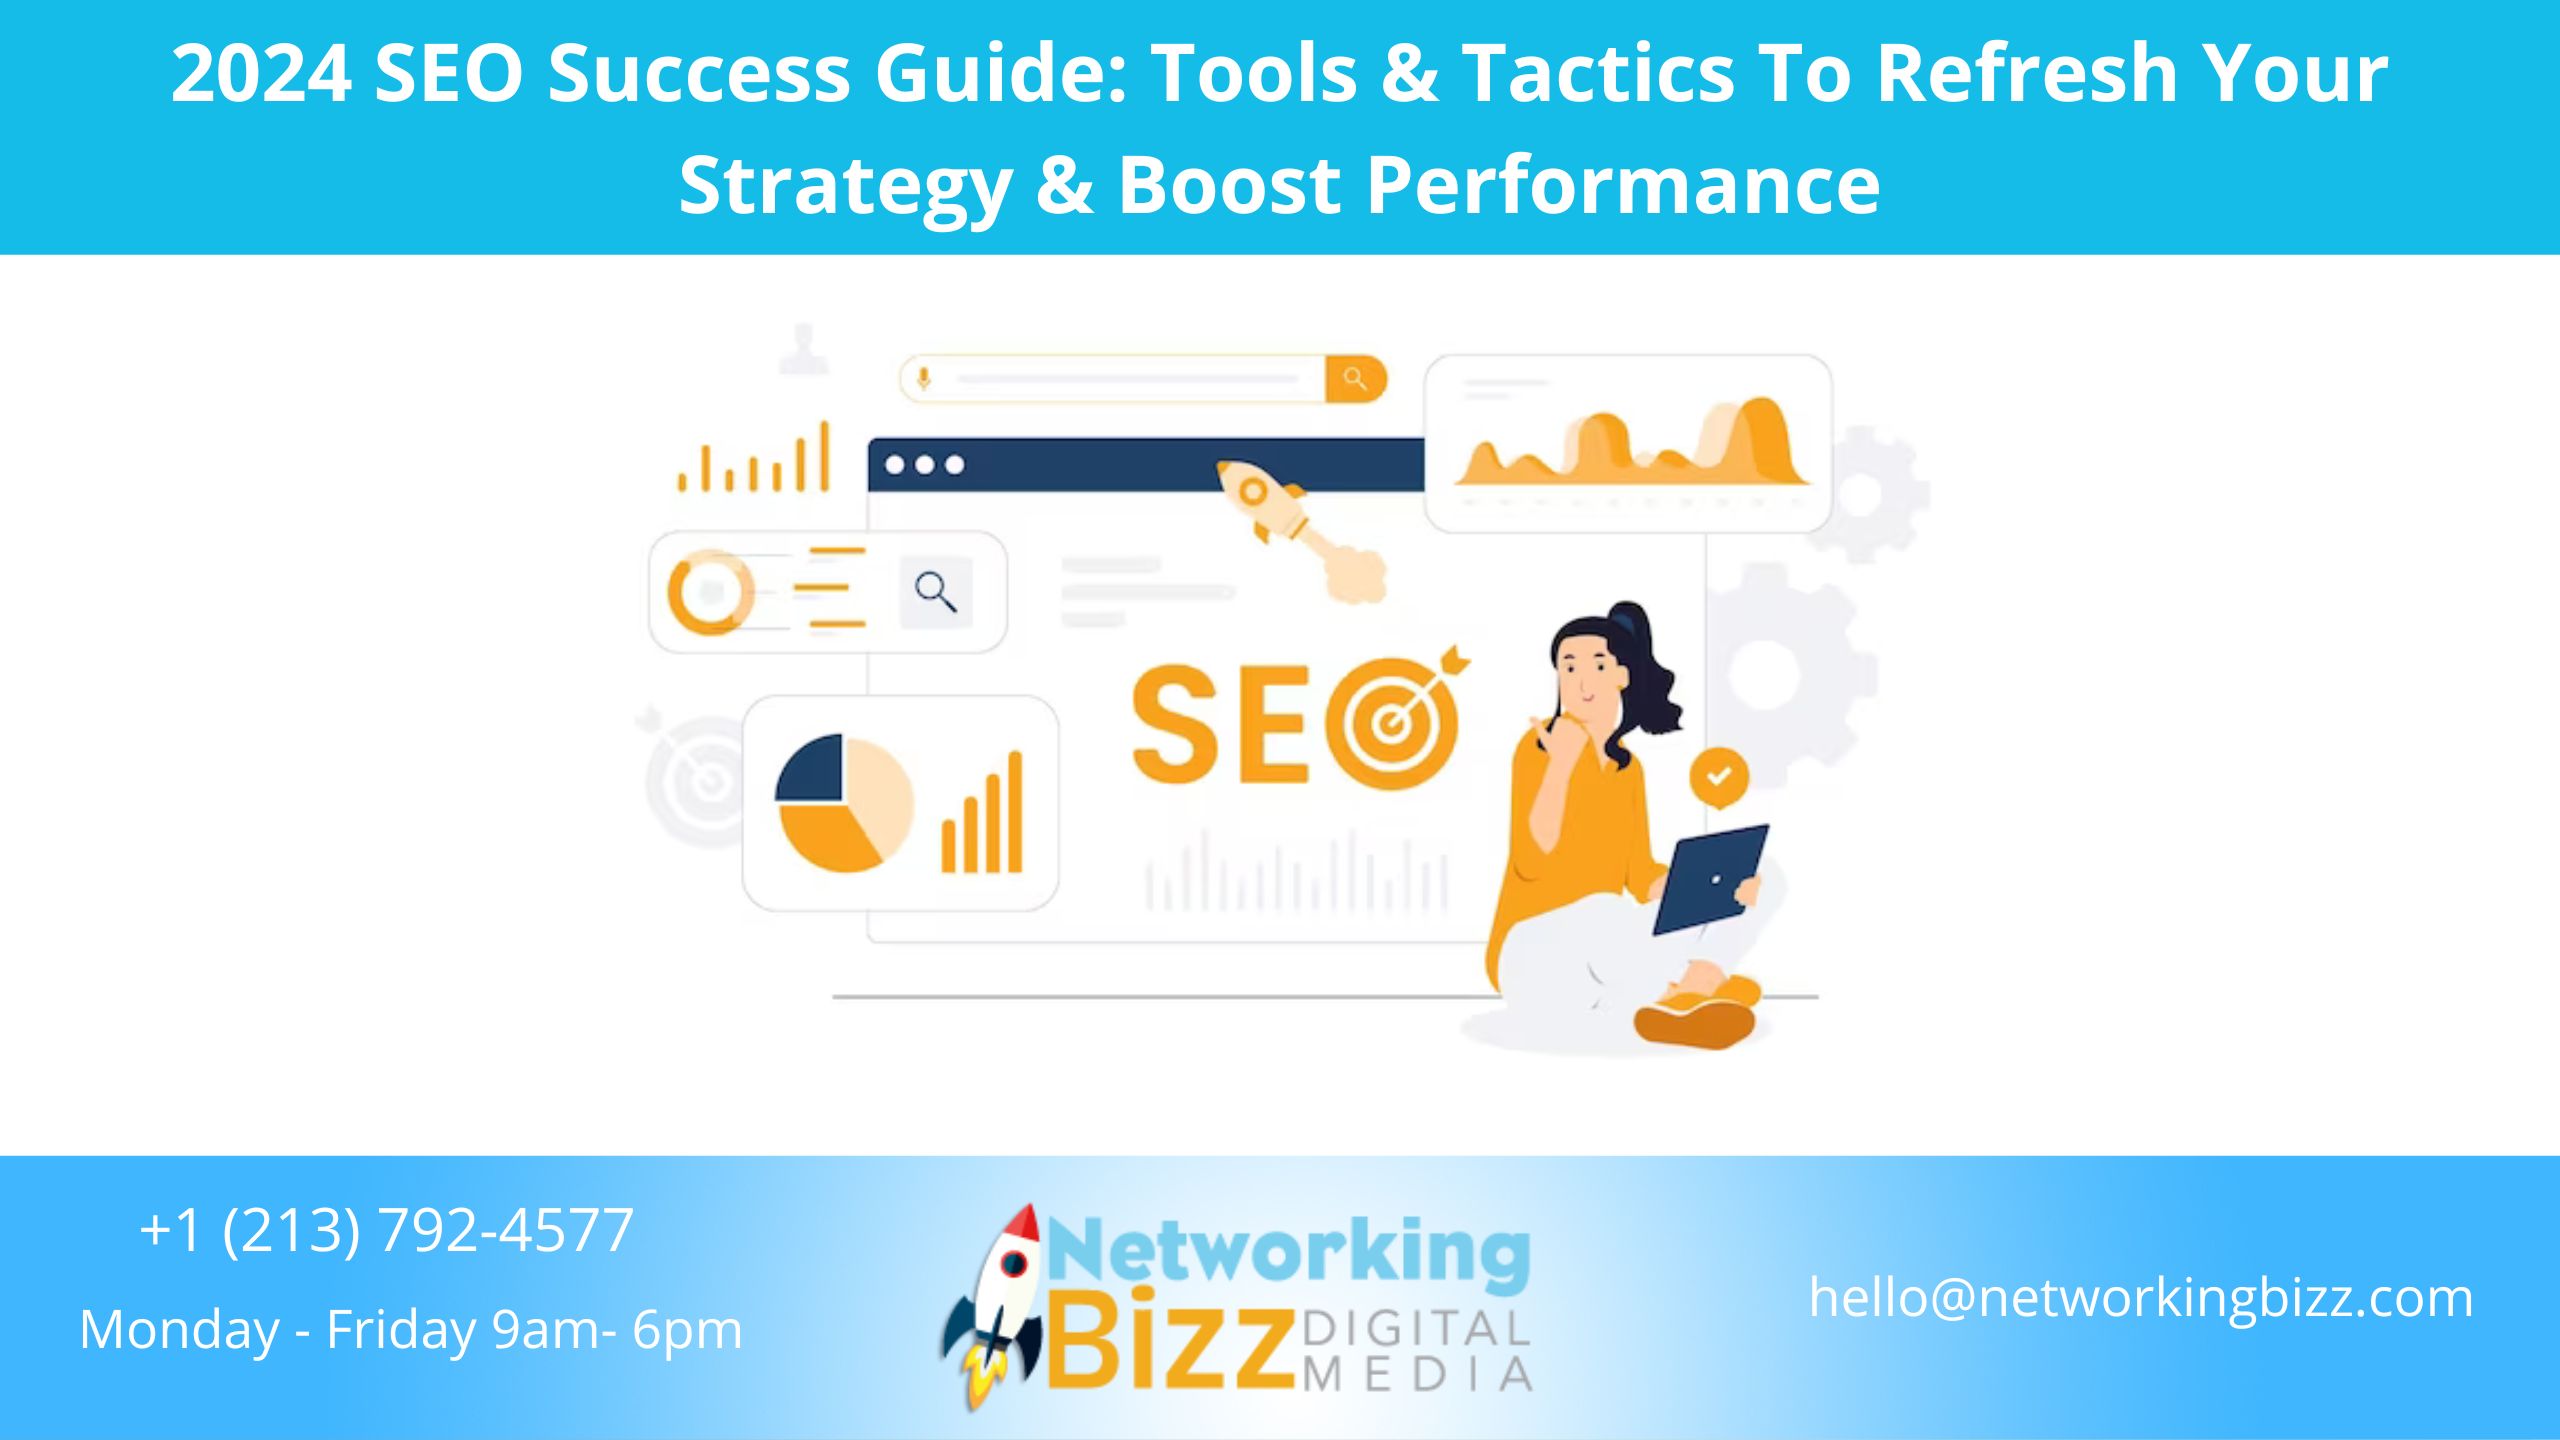 2024 SEO Success Guide: Tools & Tactics To Refresh Your Strategy & Boost Performance